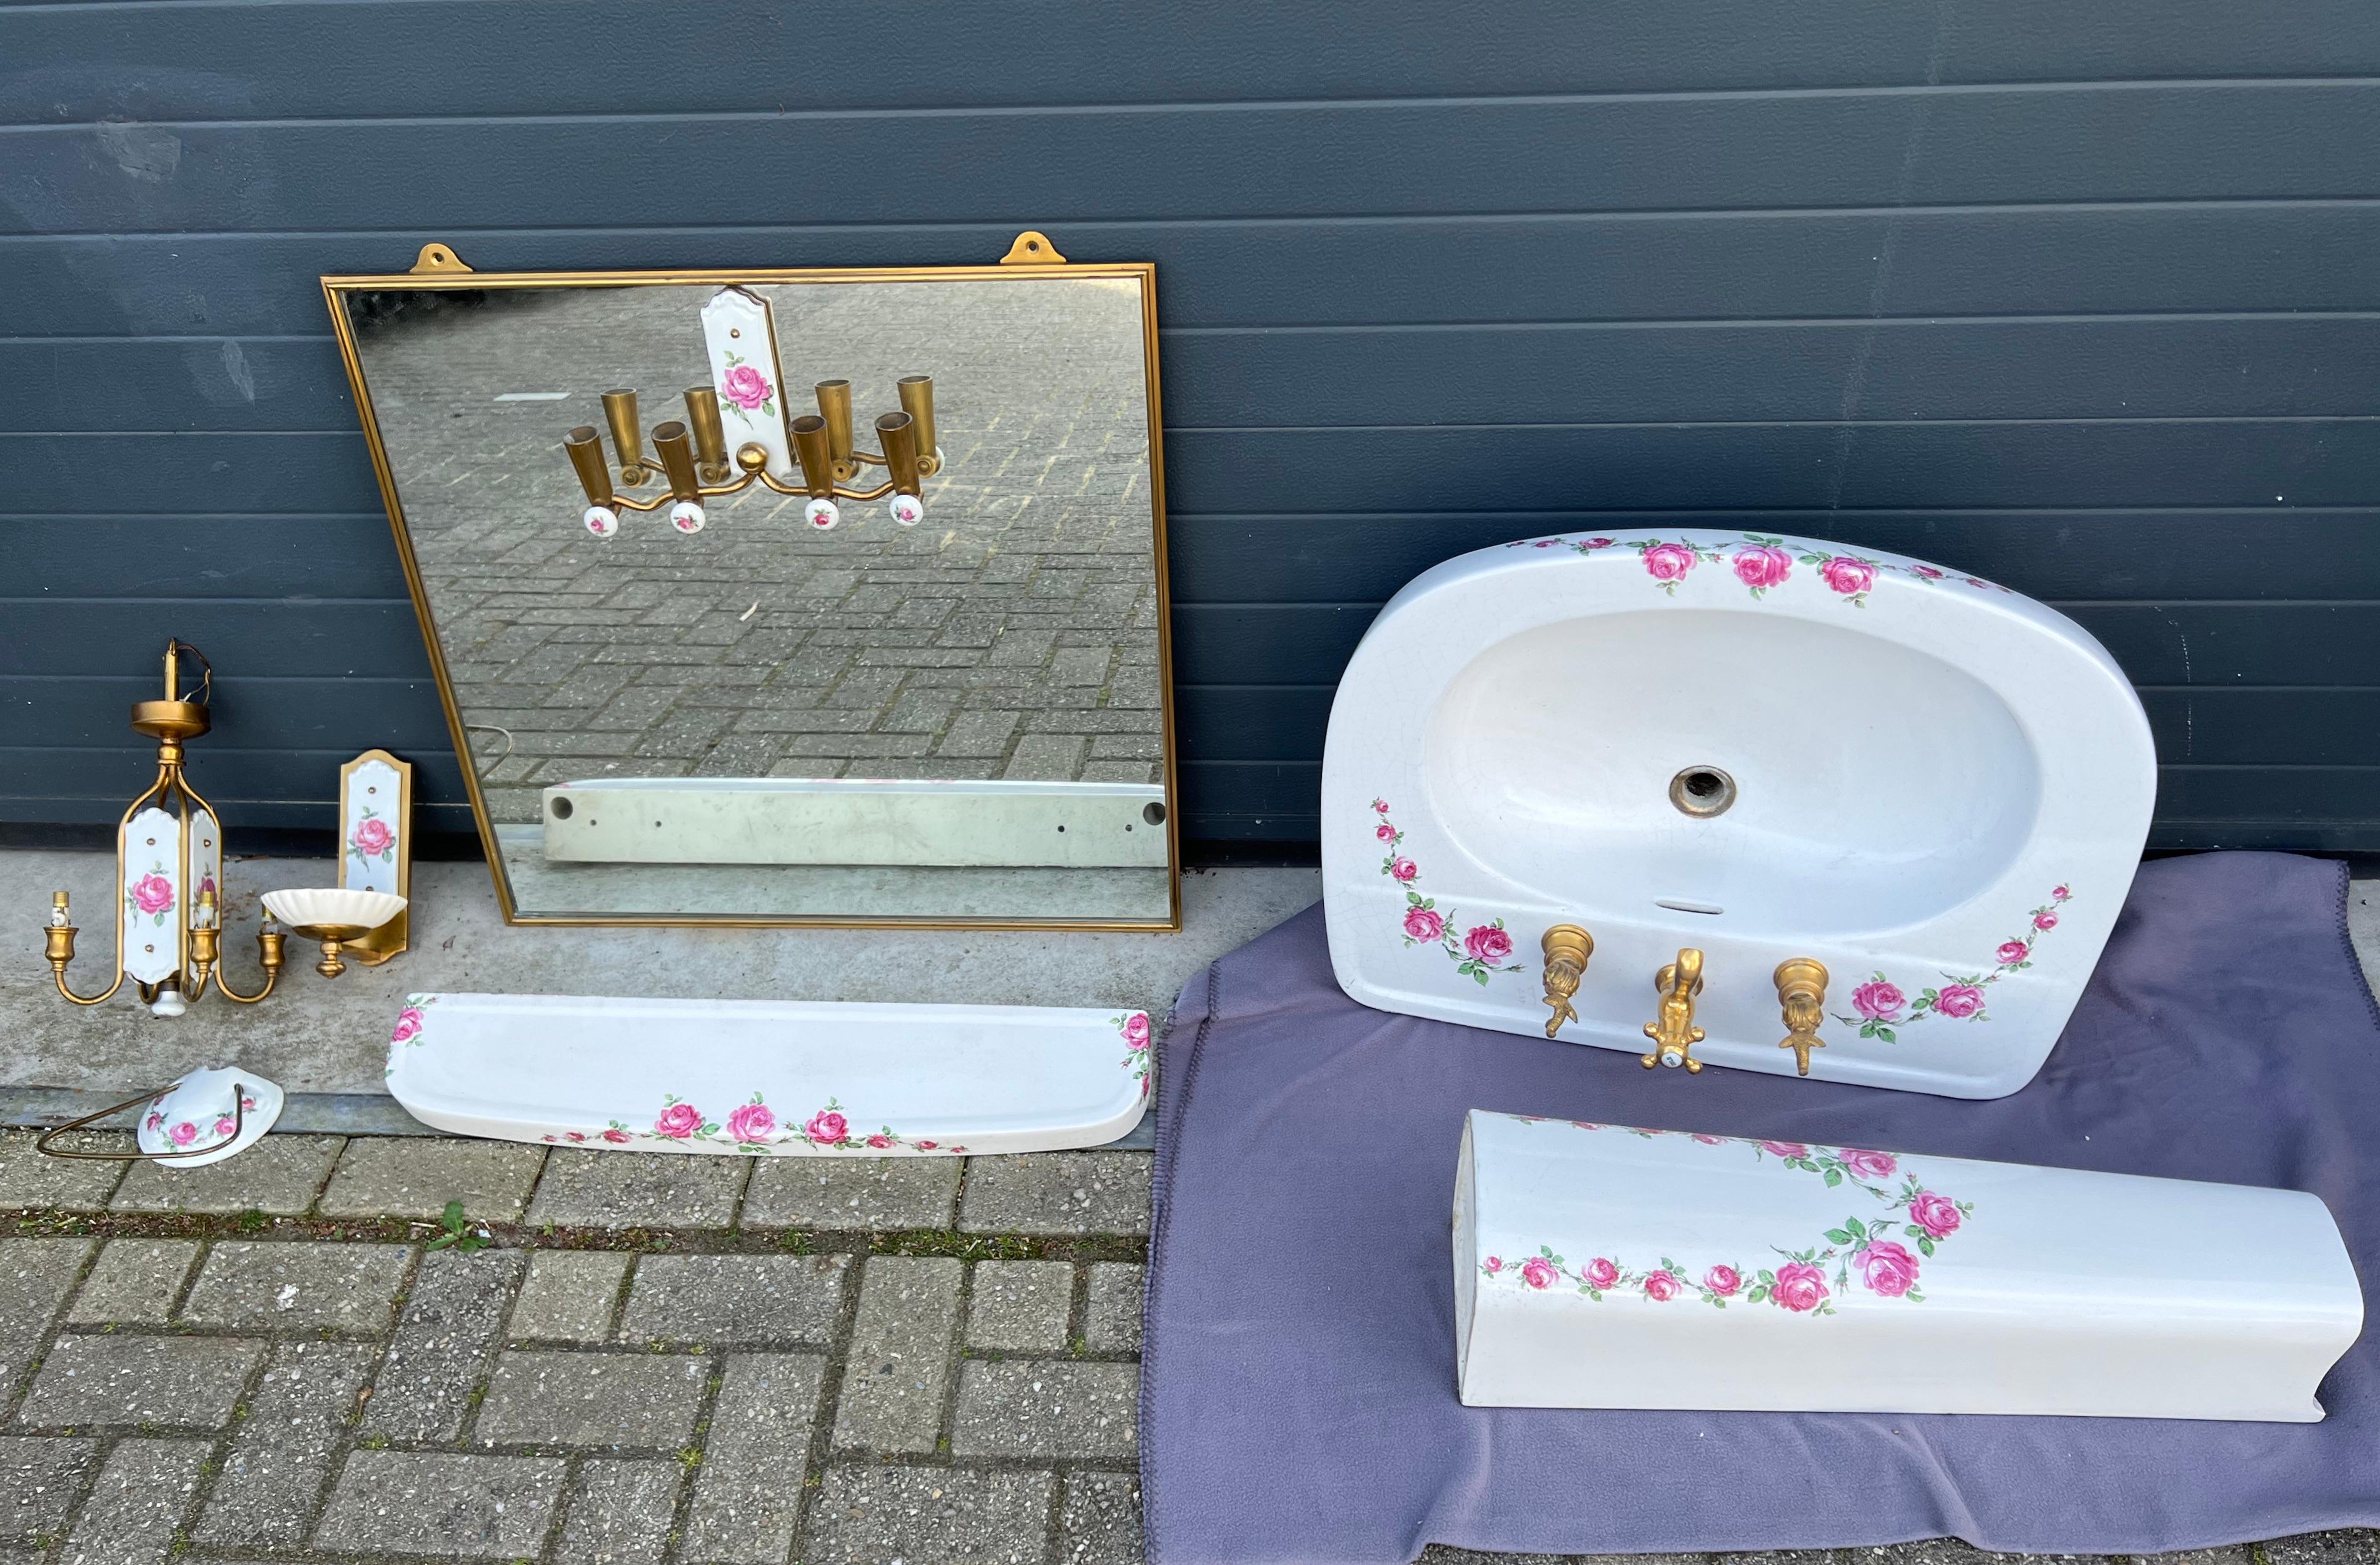 Highly decorative porcelain bathroom set with stunning roses pattern, by one of Europe's finest.

Over the years we have sold very few porcelain Limoges pieces and that is simply because these high value items don't find there way to the open